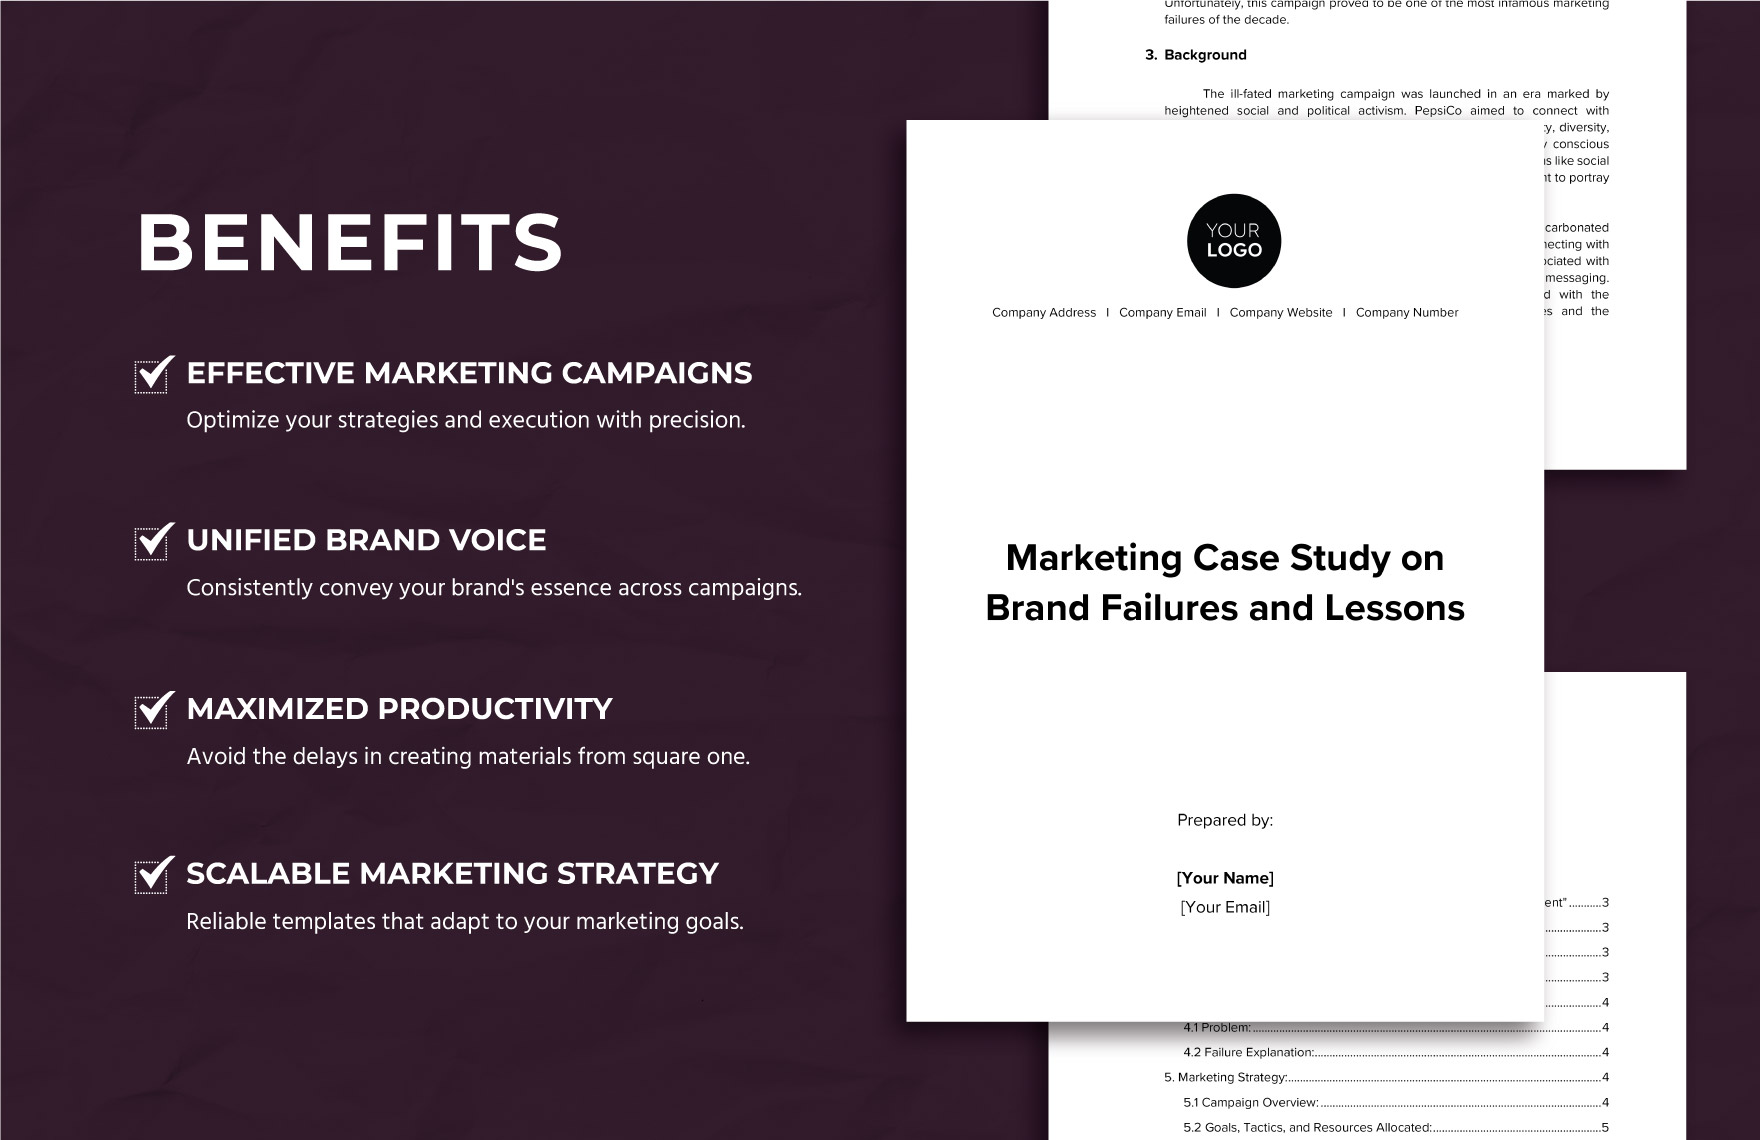 Marketing Case Study on Brand Failures and Lessons Template